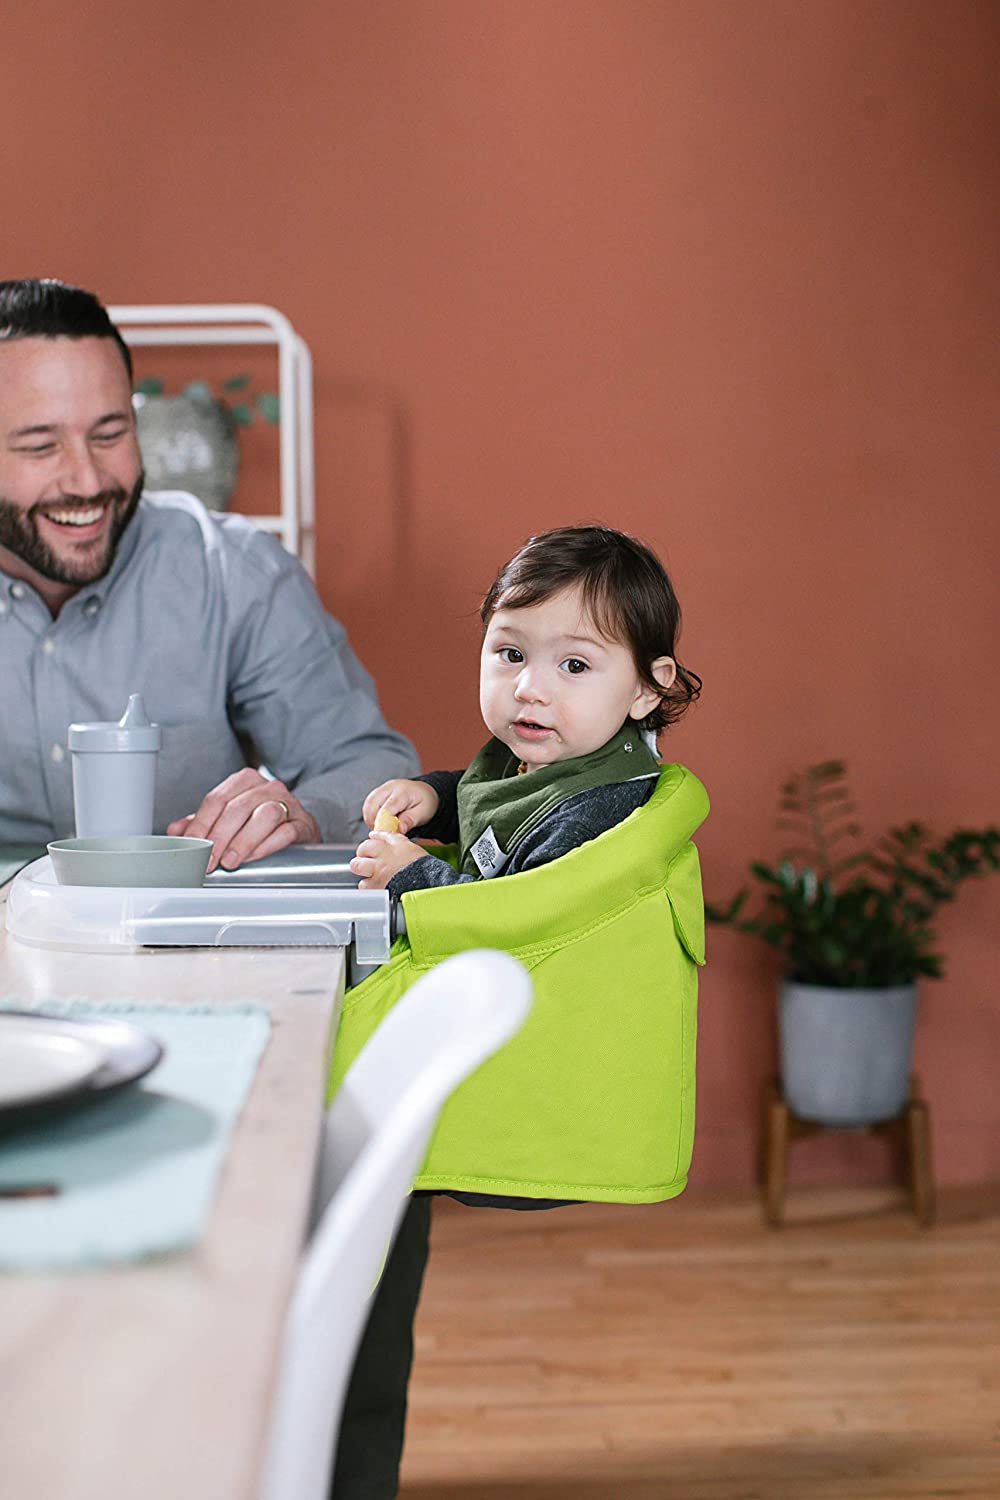 https://bigbigmart.com/wp-content/uploads/2023/05/Inglesina-Fast-Table-Chair-Hook-On-Portable-High-Chair-for-Babies-and-Toddlers-Damage-Free-Travel-Booster-Seat-for-Restaurant-Use-Lime-Green7.jpg